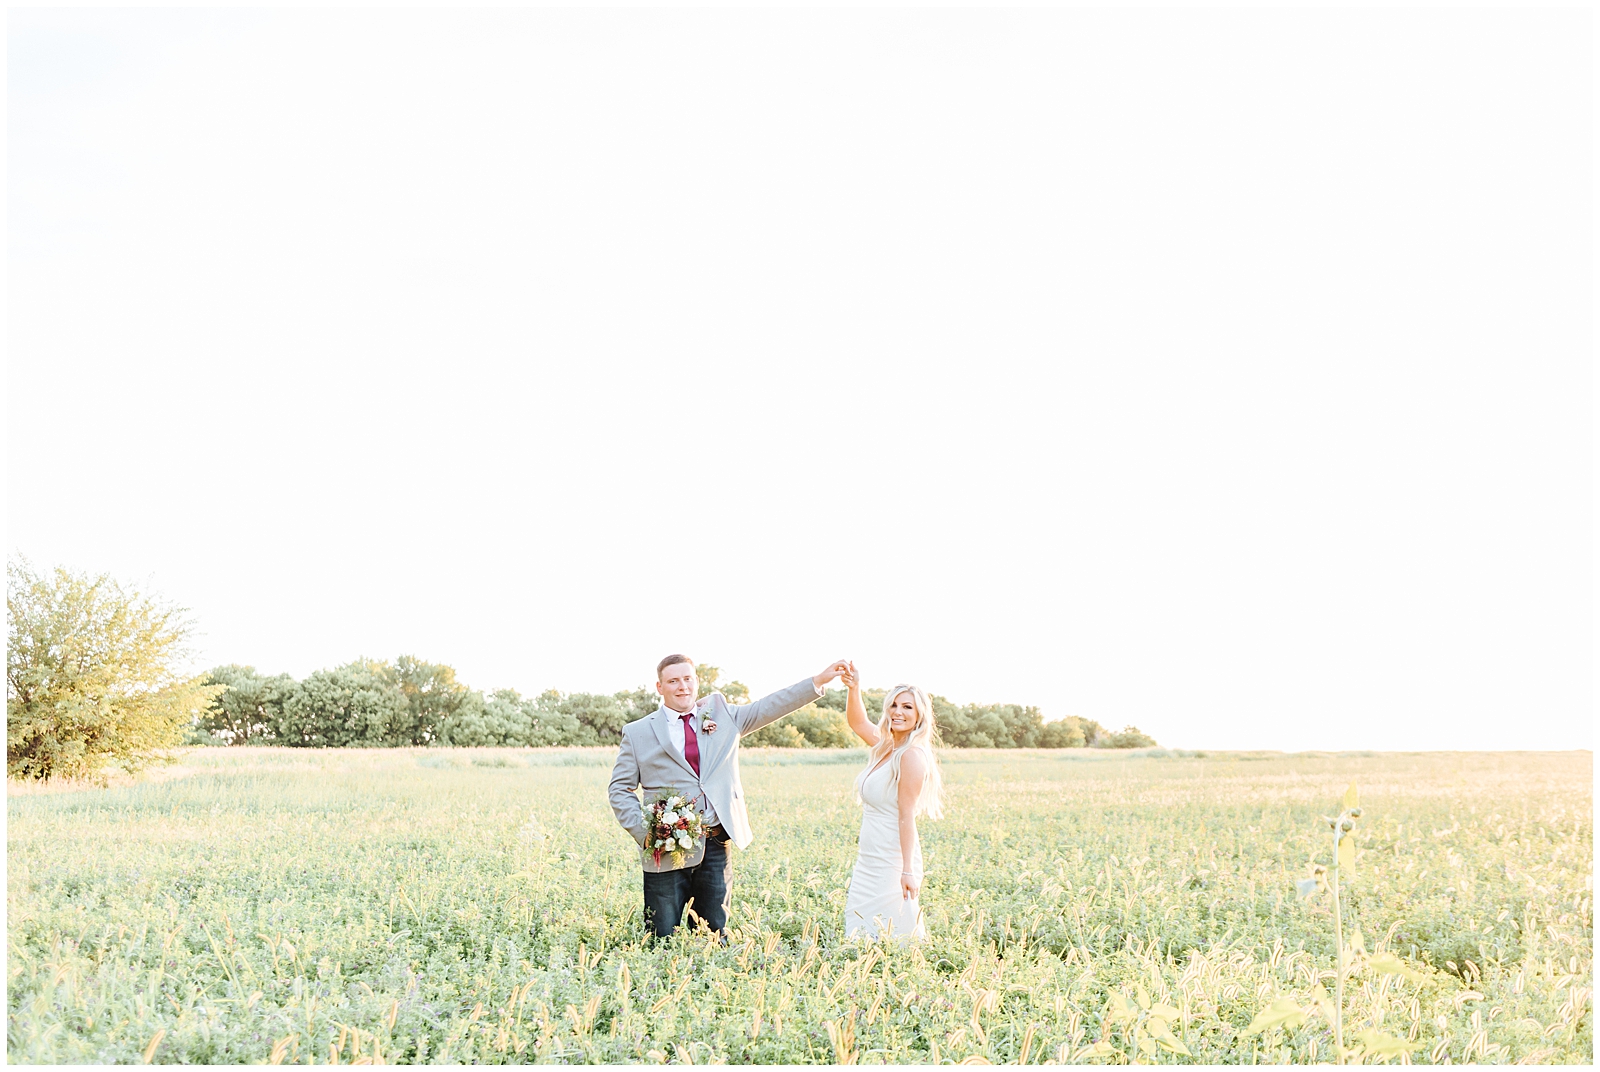 Twirling in Farm Field at Private Idaho Ranch Wedding